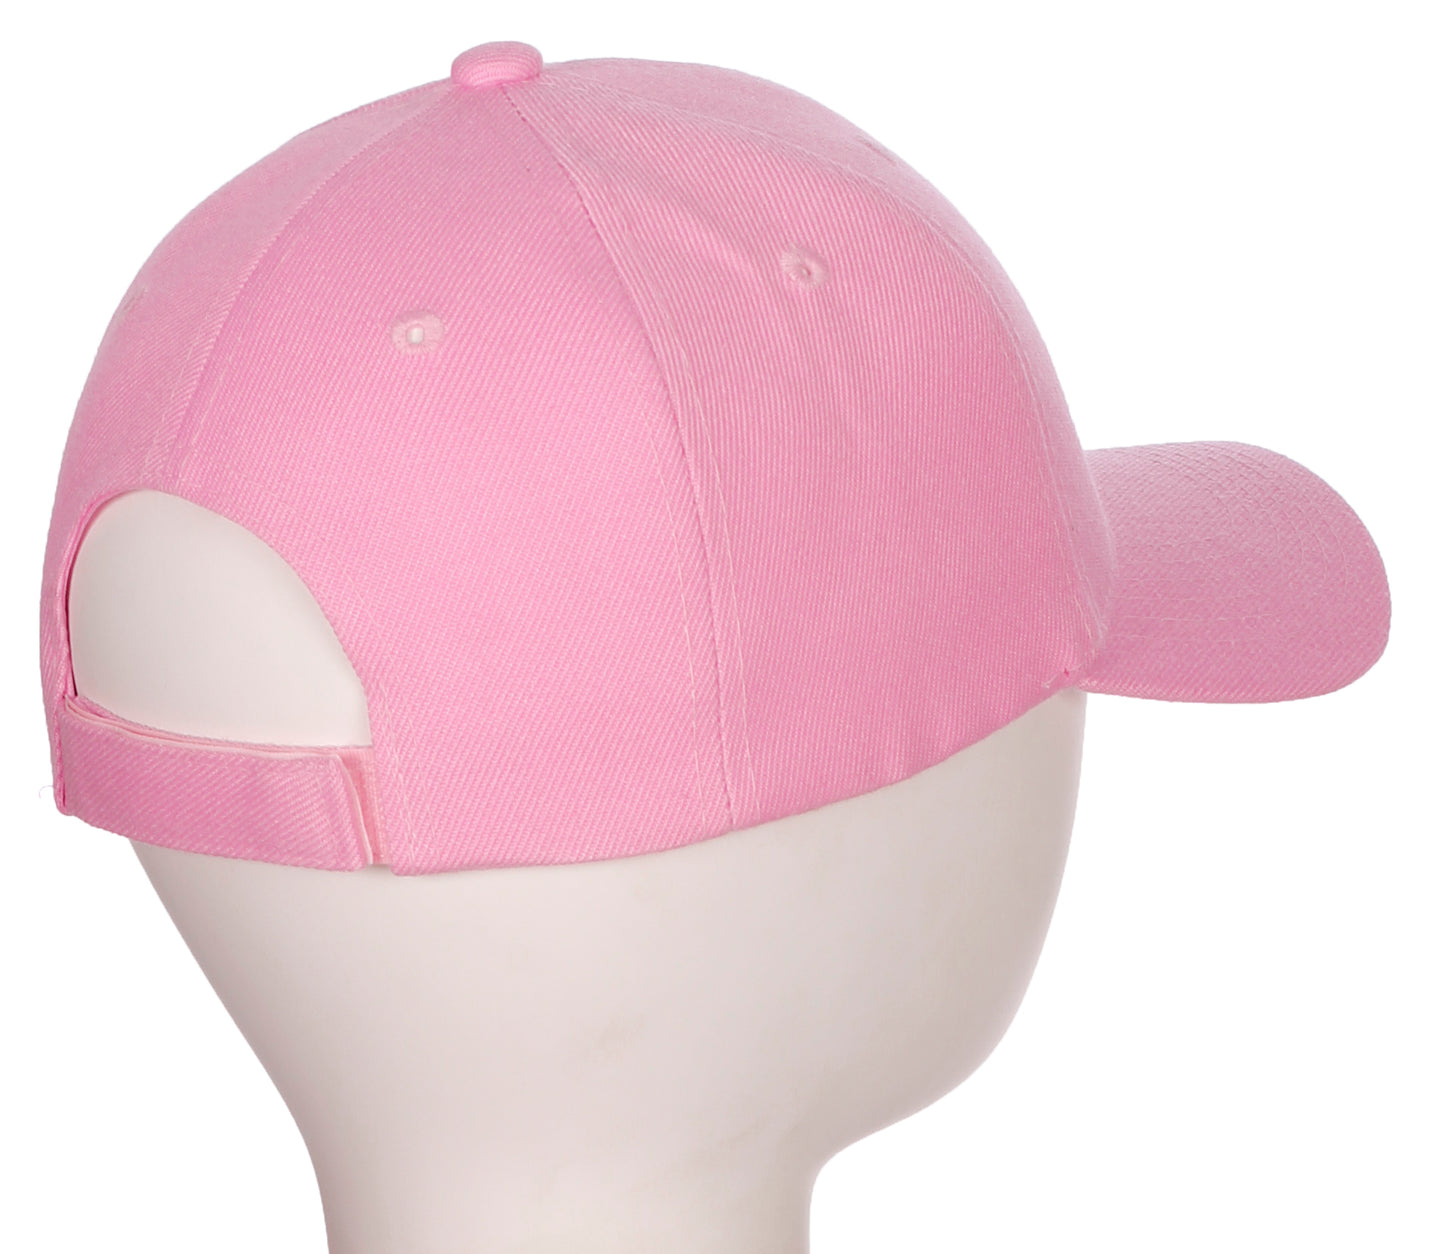 Classic Baseball Hat Custom A to Z Initial Team Letter, Pink Cap White Black